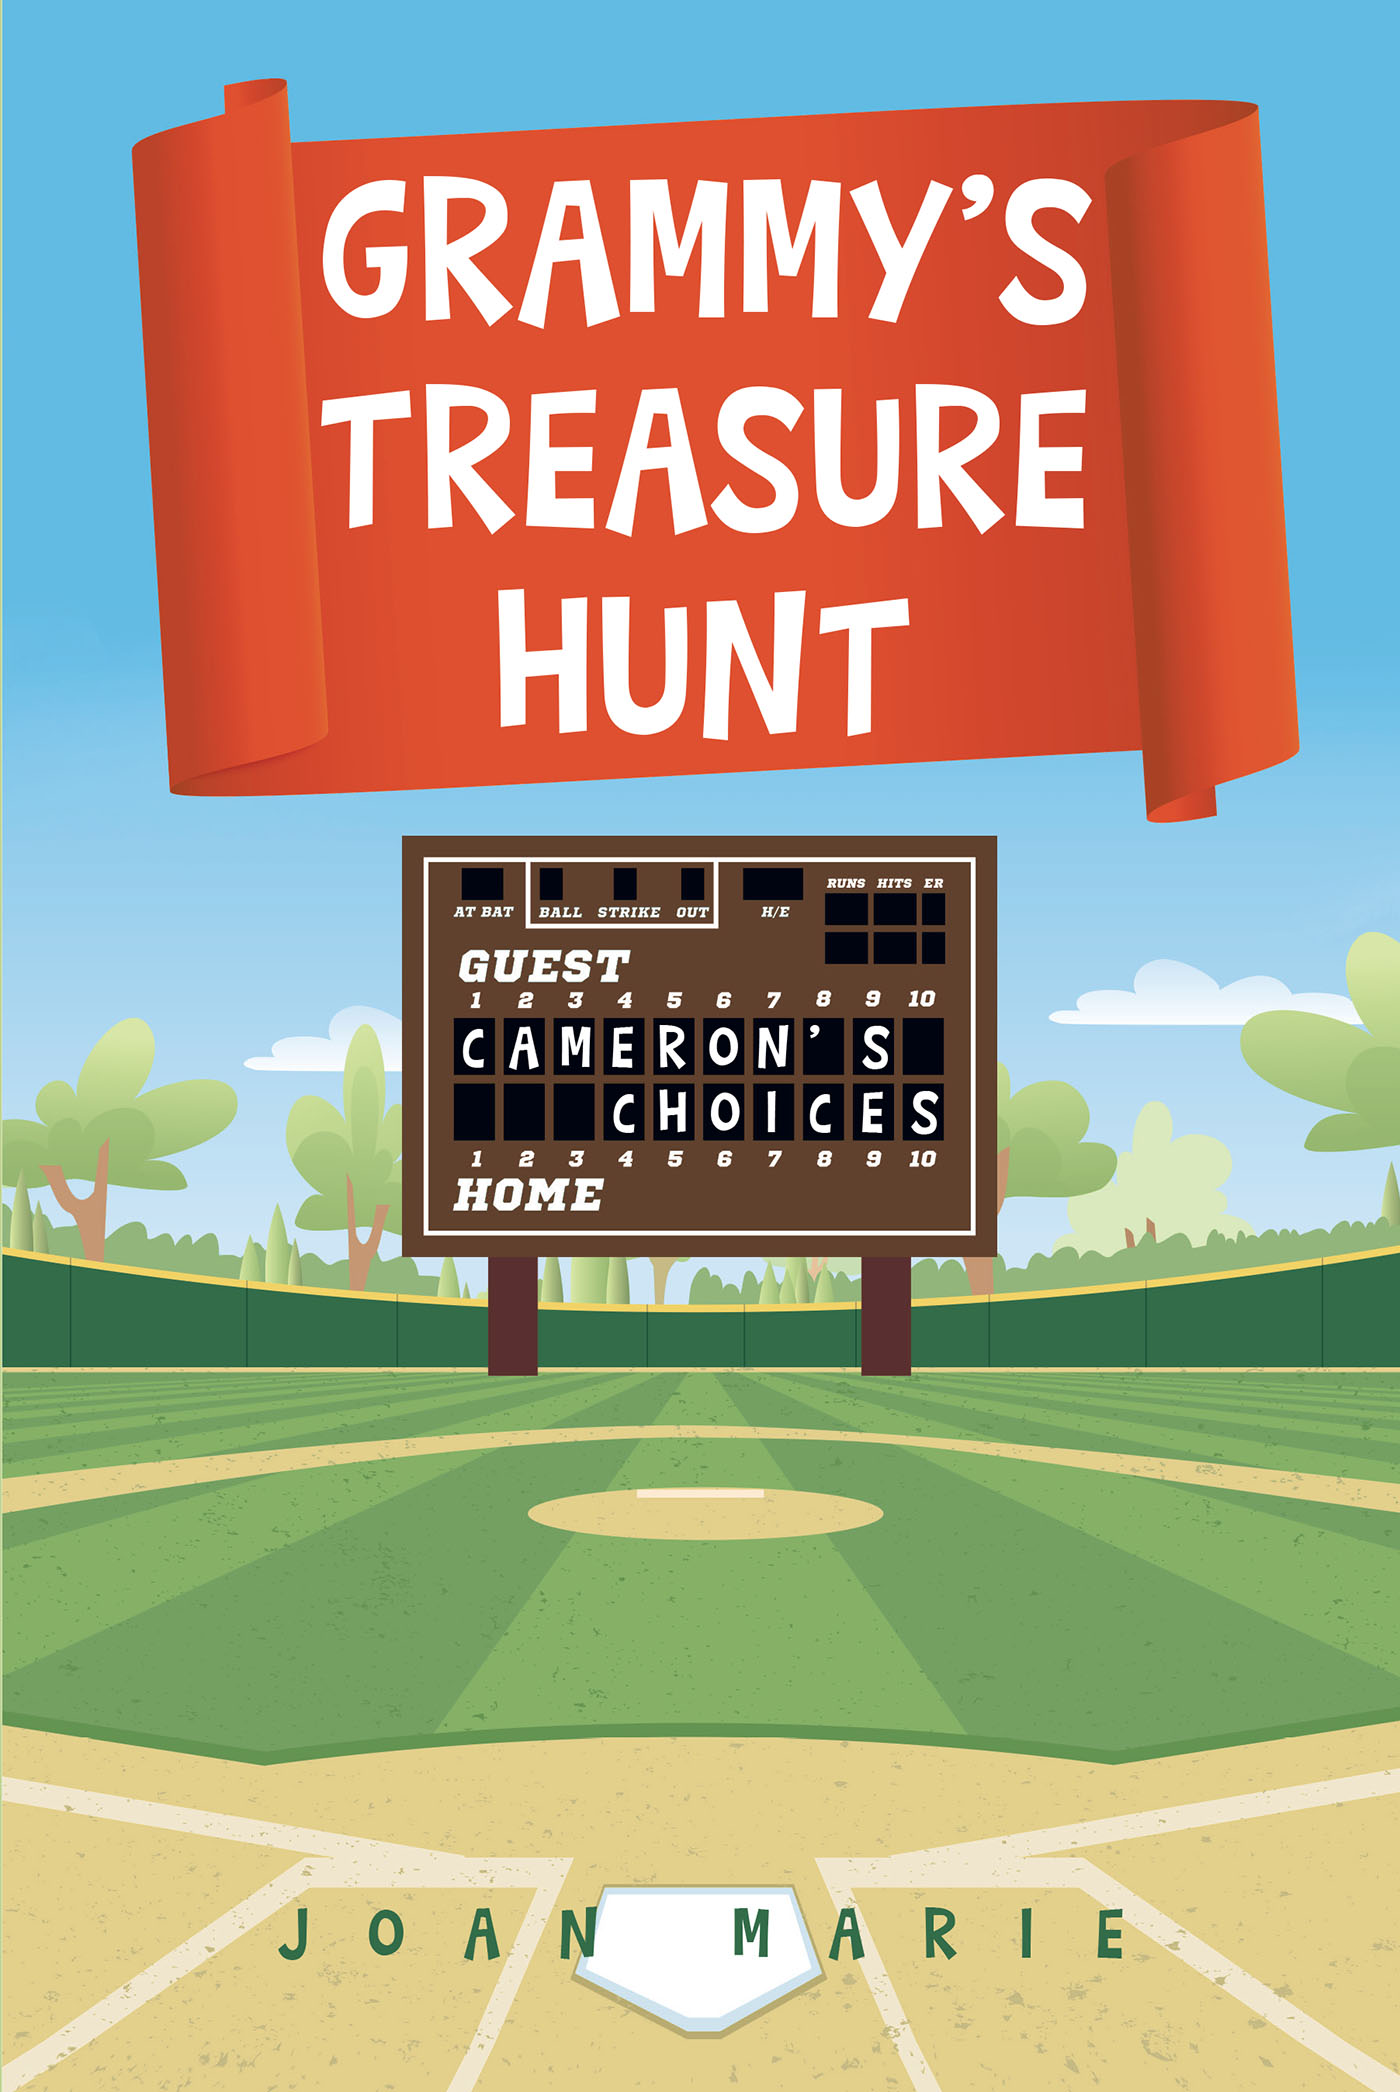 Joan Marie’s Newly Released "Grammy’s Treasure Hunt: Cameron’s Choices" is an Enjoyable Juvenile Fiction That Promotes Positive Morals